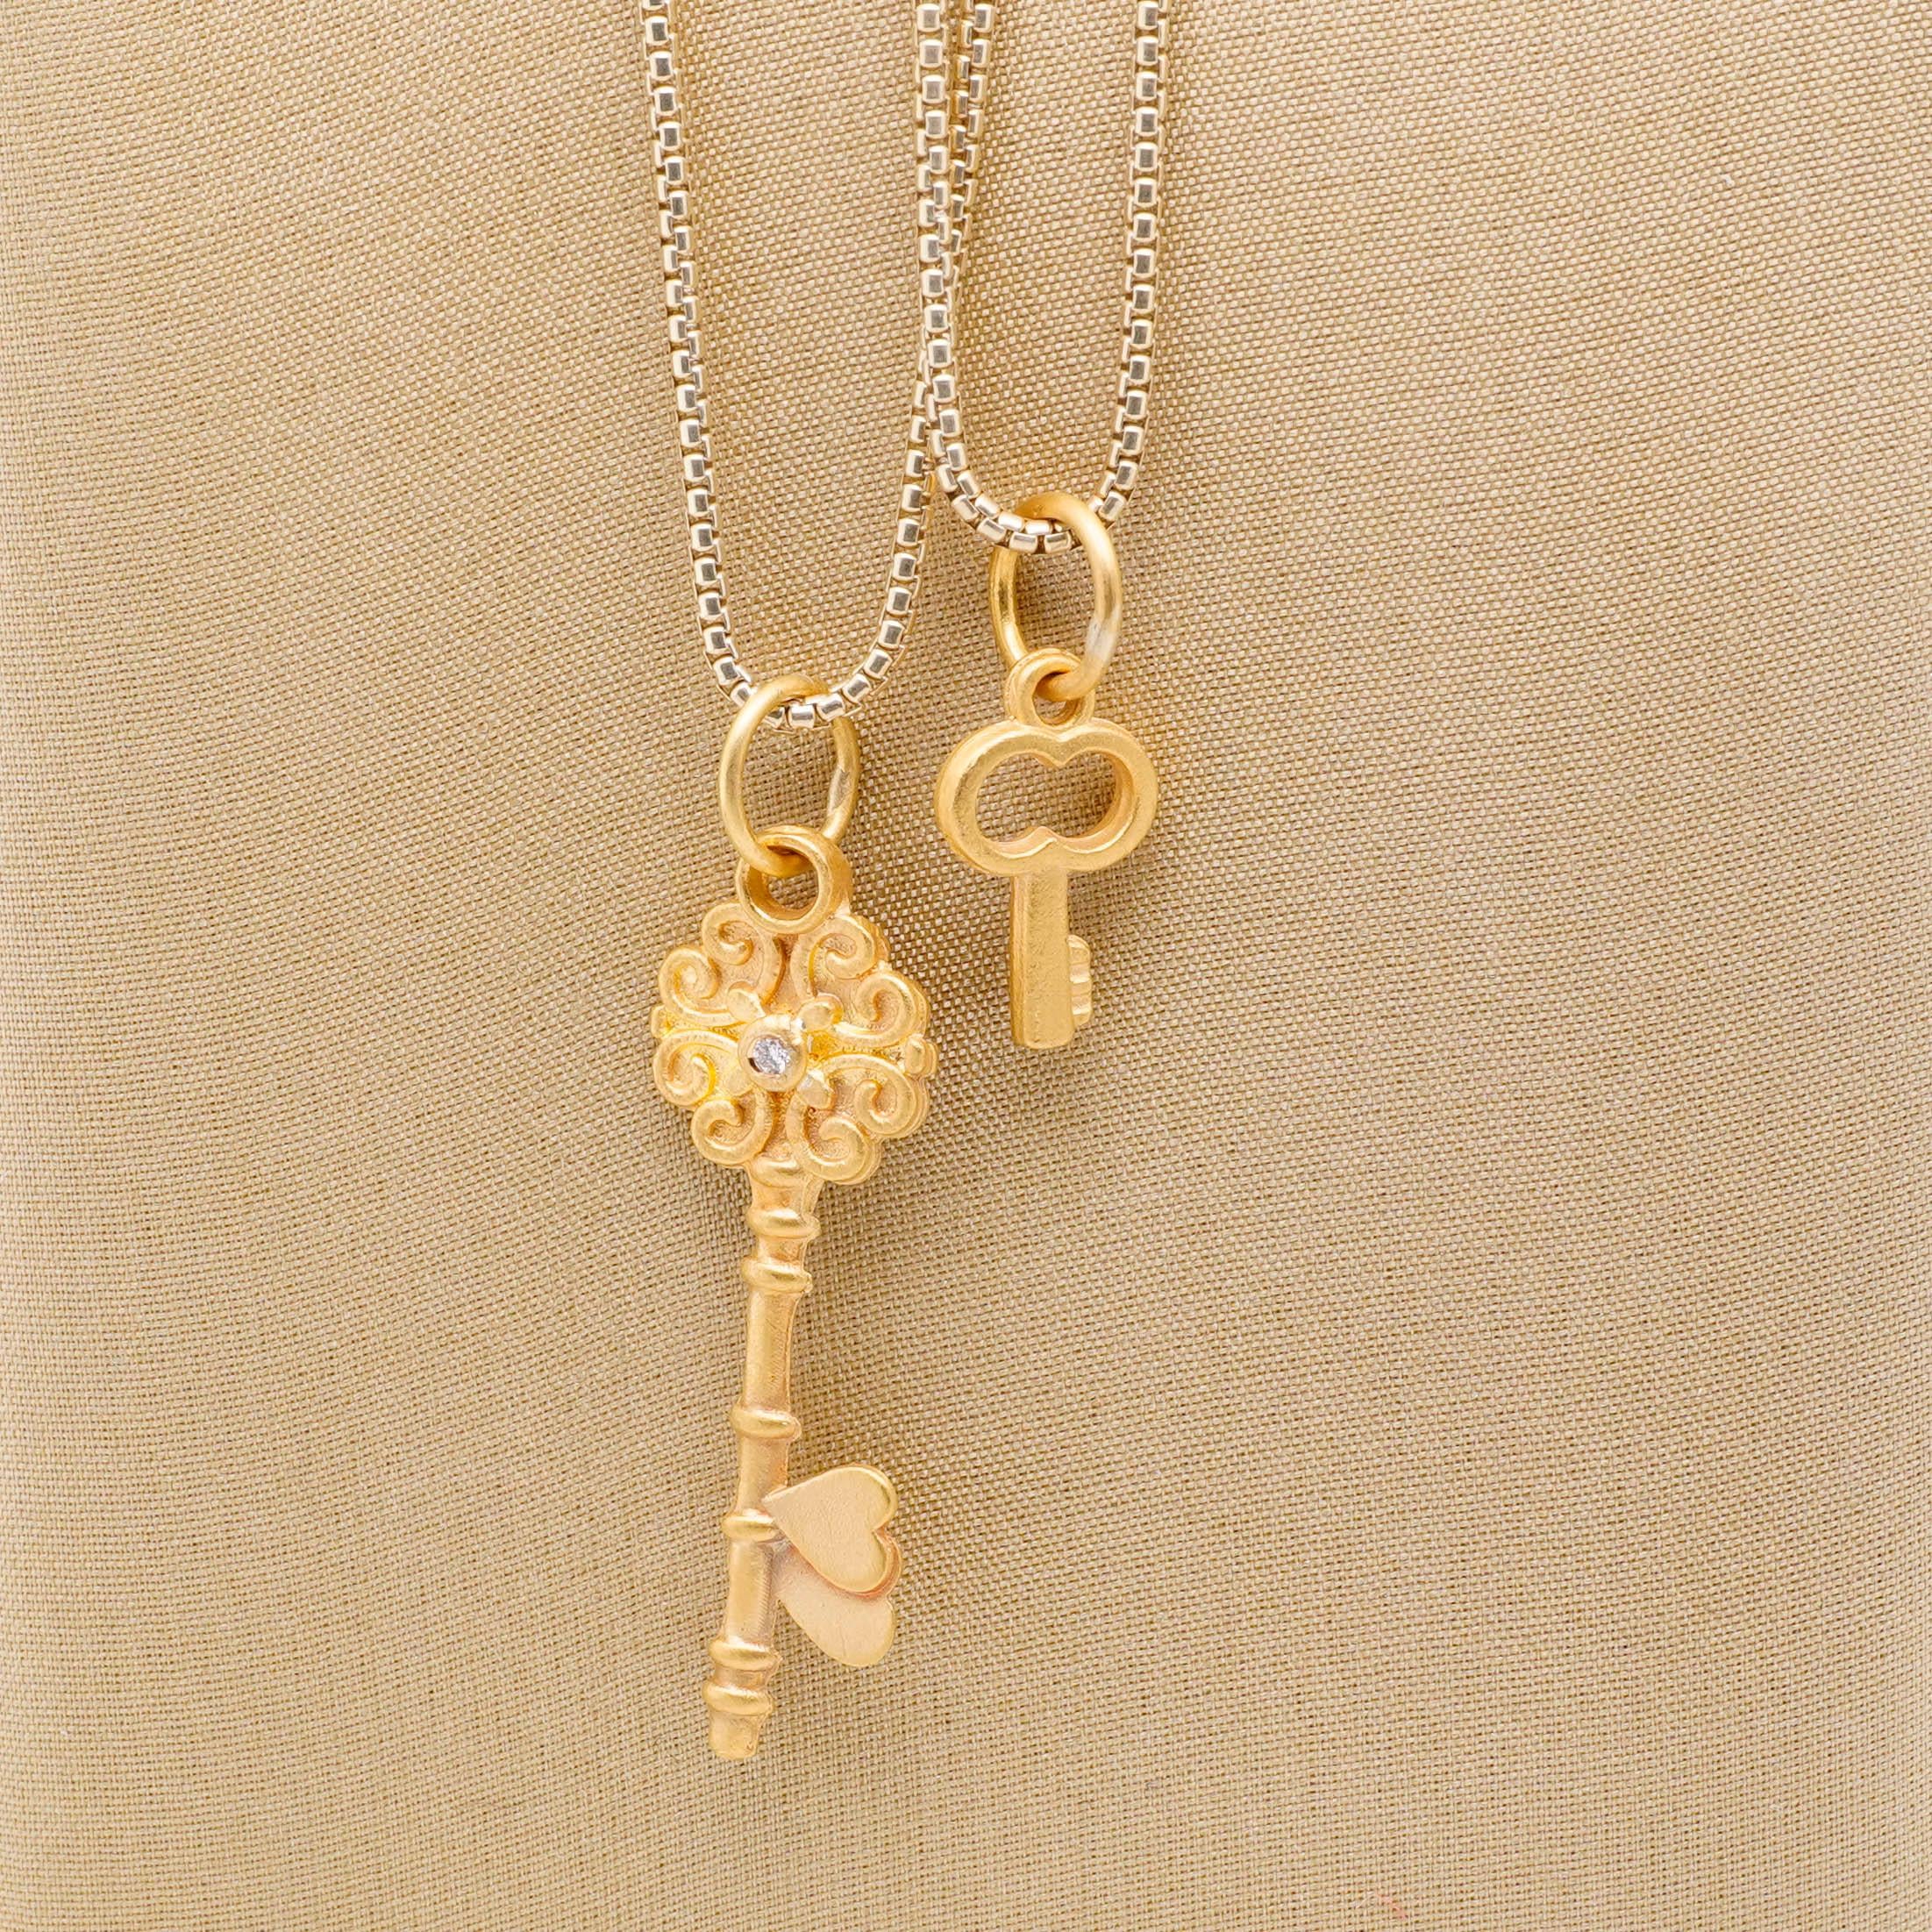 Edwardian Small Love Key Charm Pendant Necklace with Diamond, 24kt Solid Gold For Sale